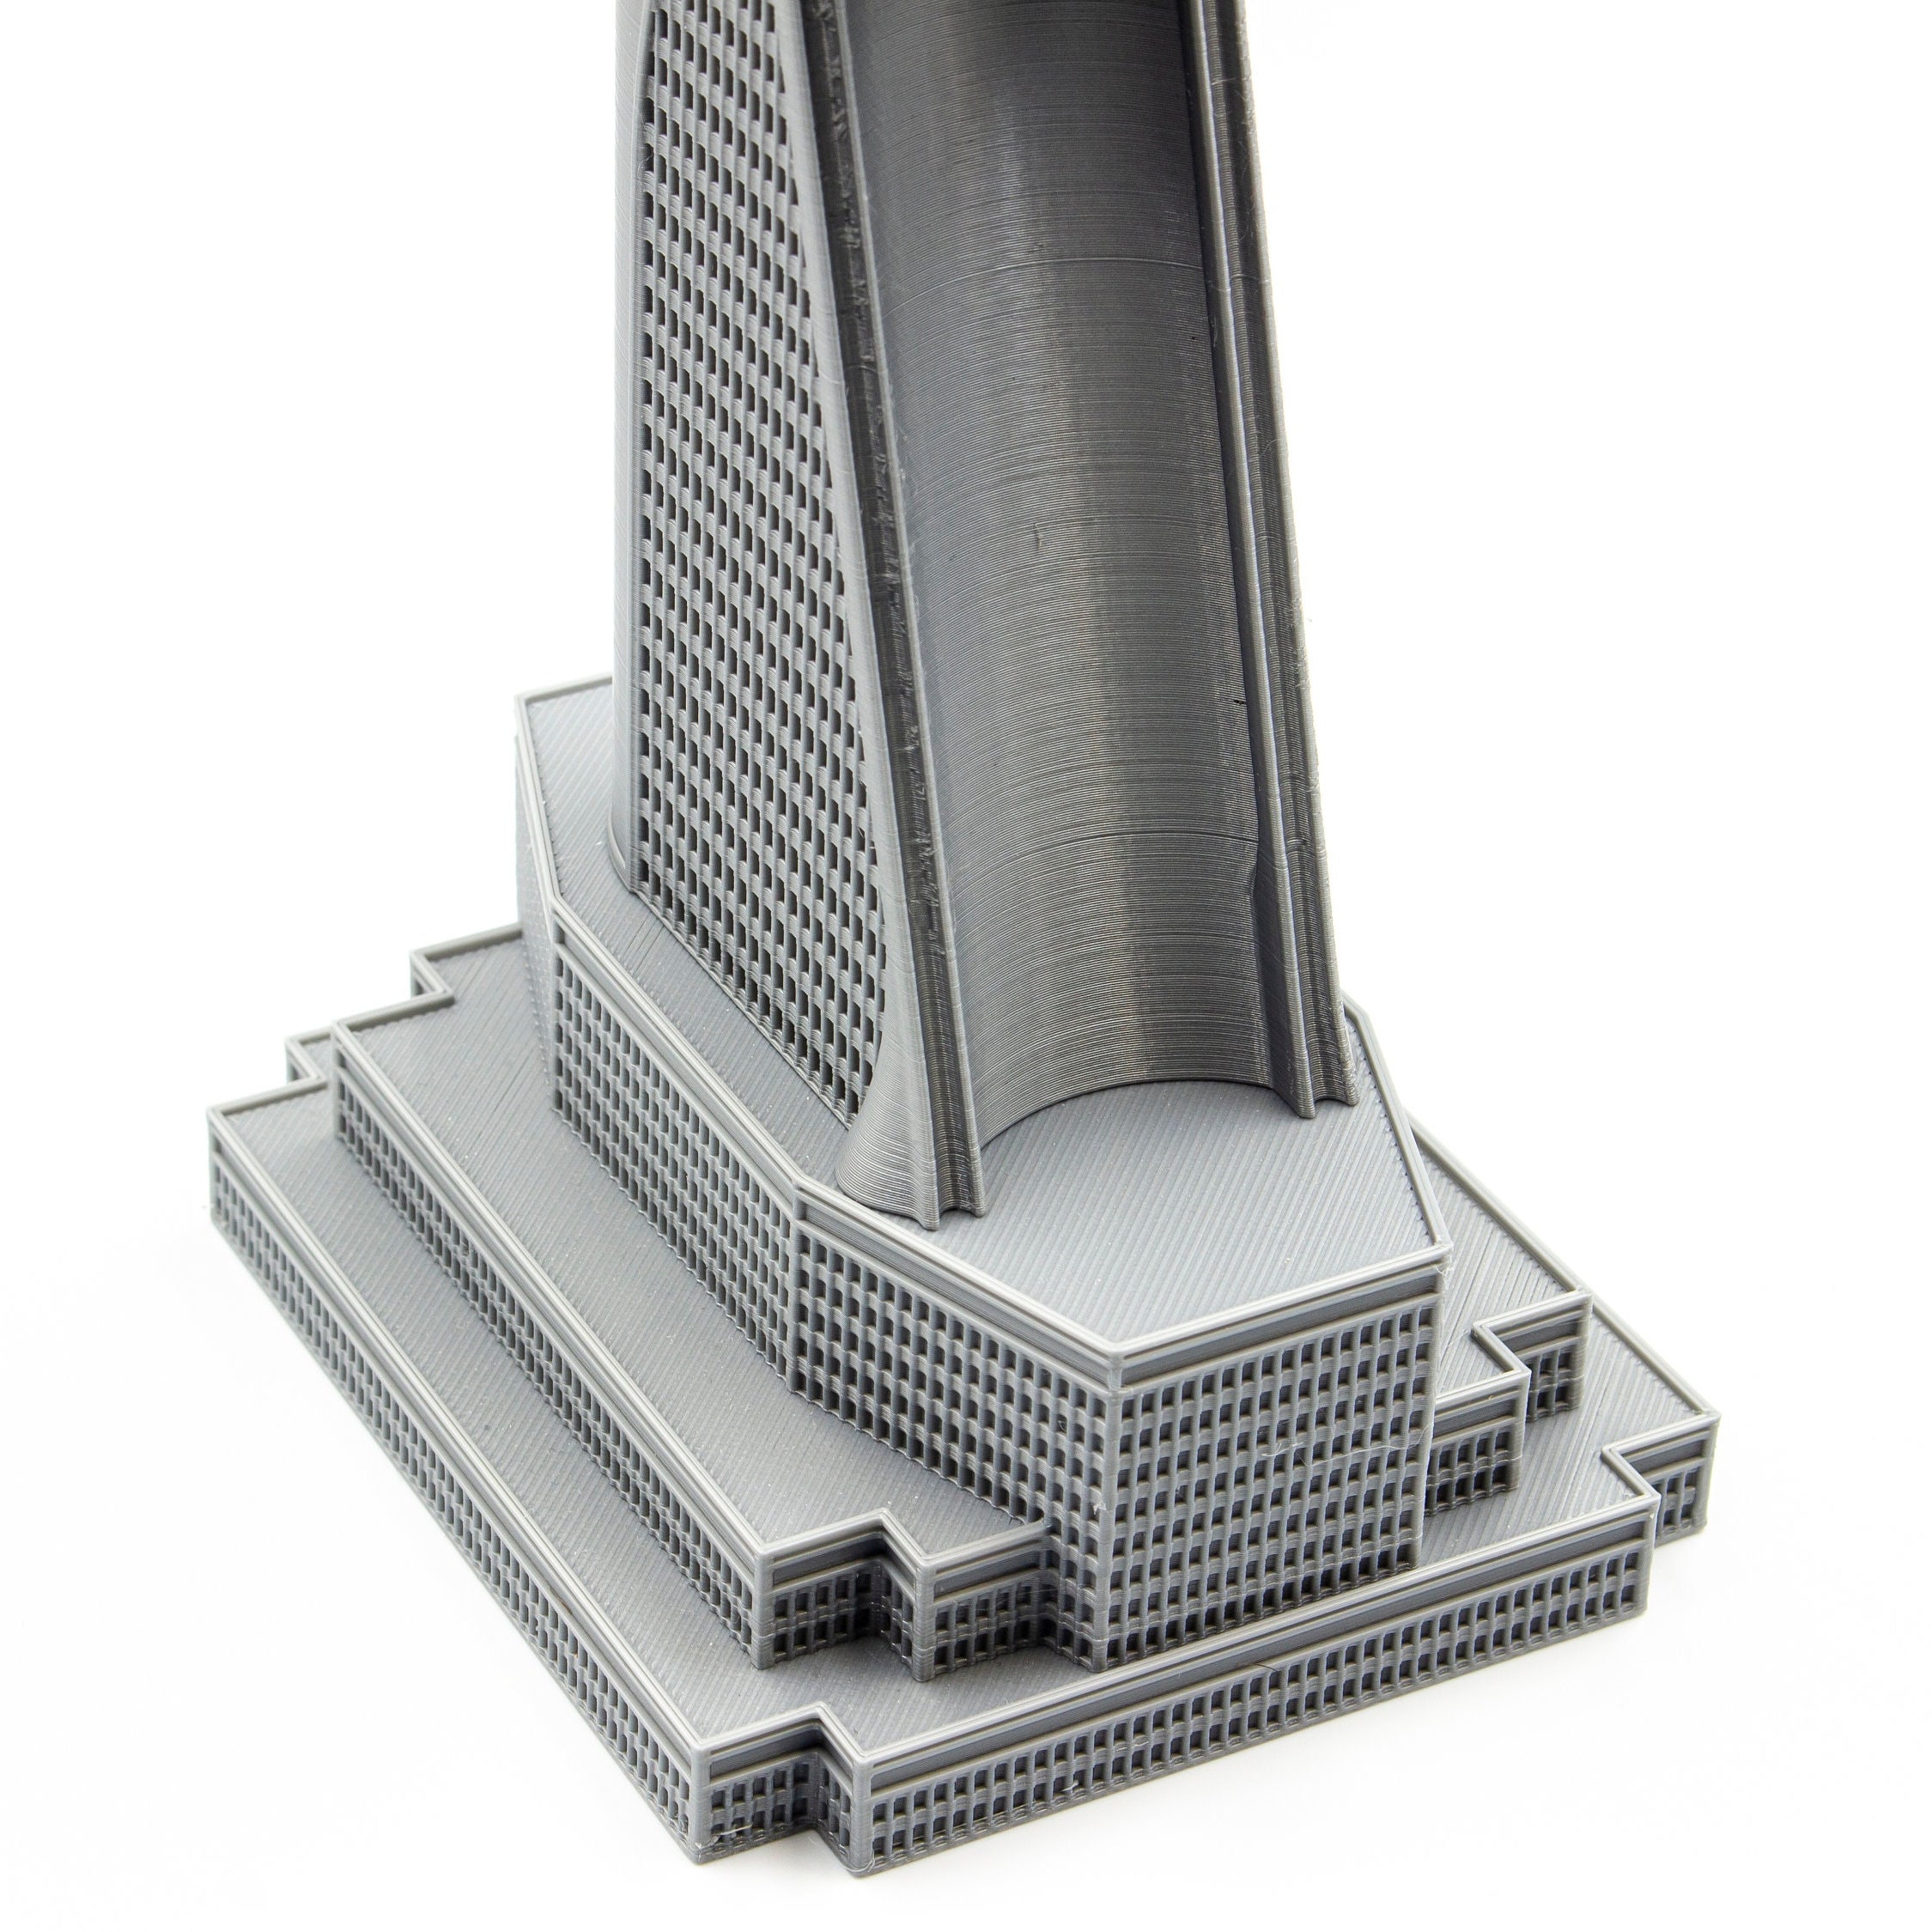 Avengers Tower Building 3d Printed Architectural Model Stark 